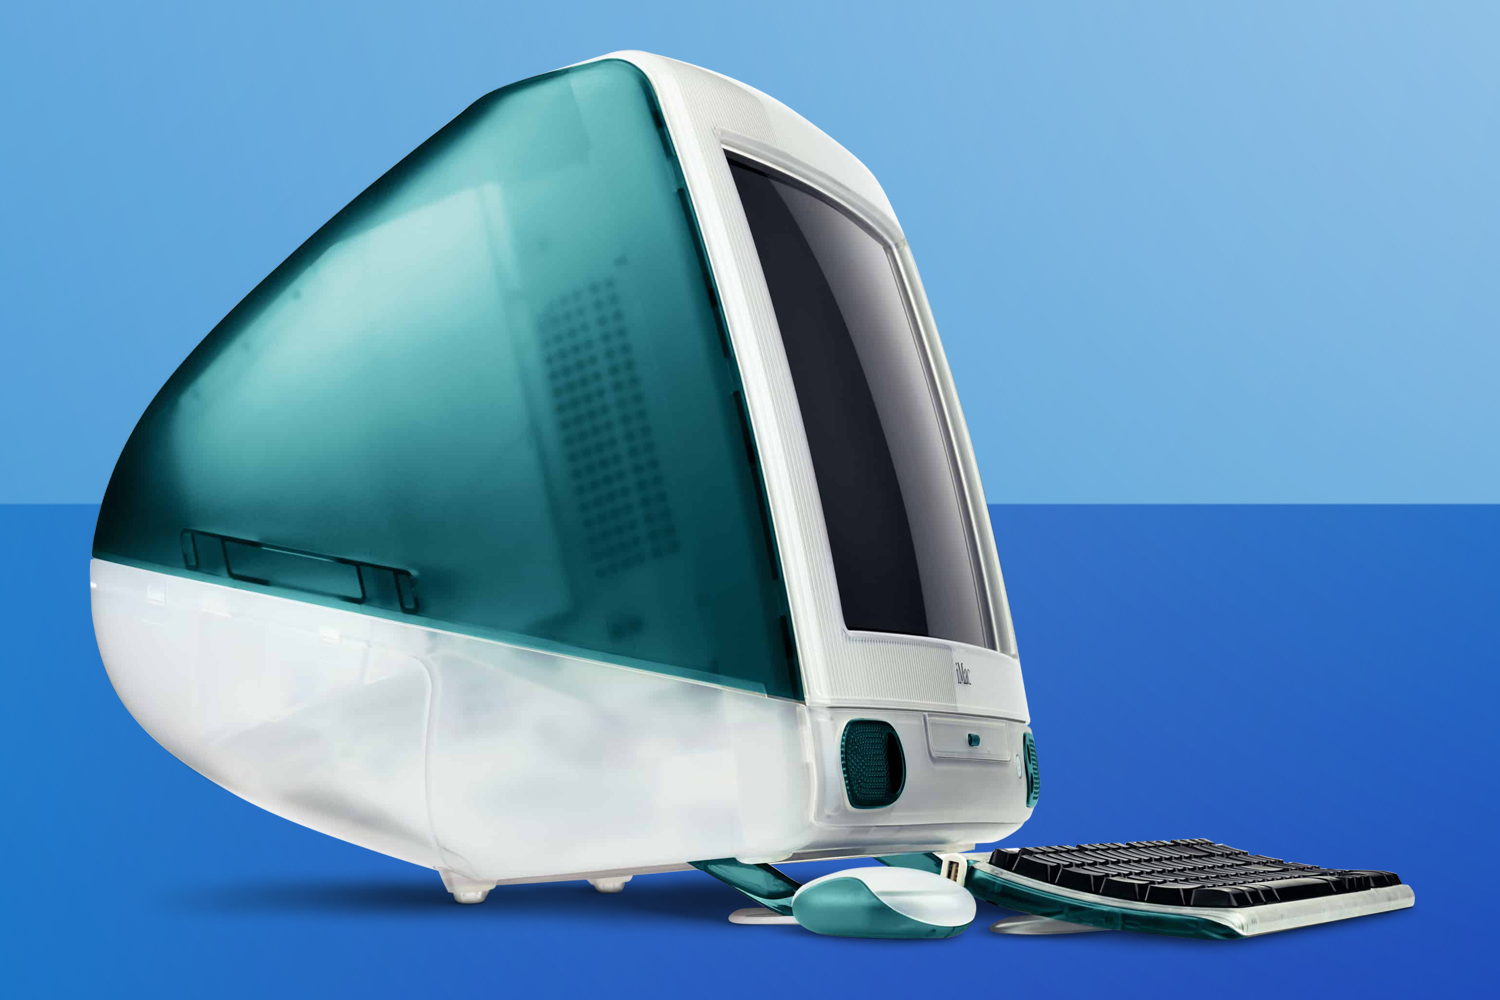 Why iMac G3 was the computer that changed everything for Apple